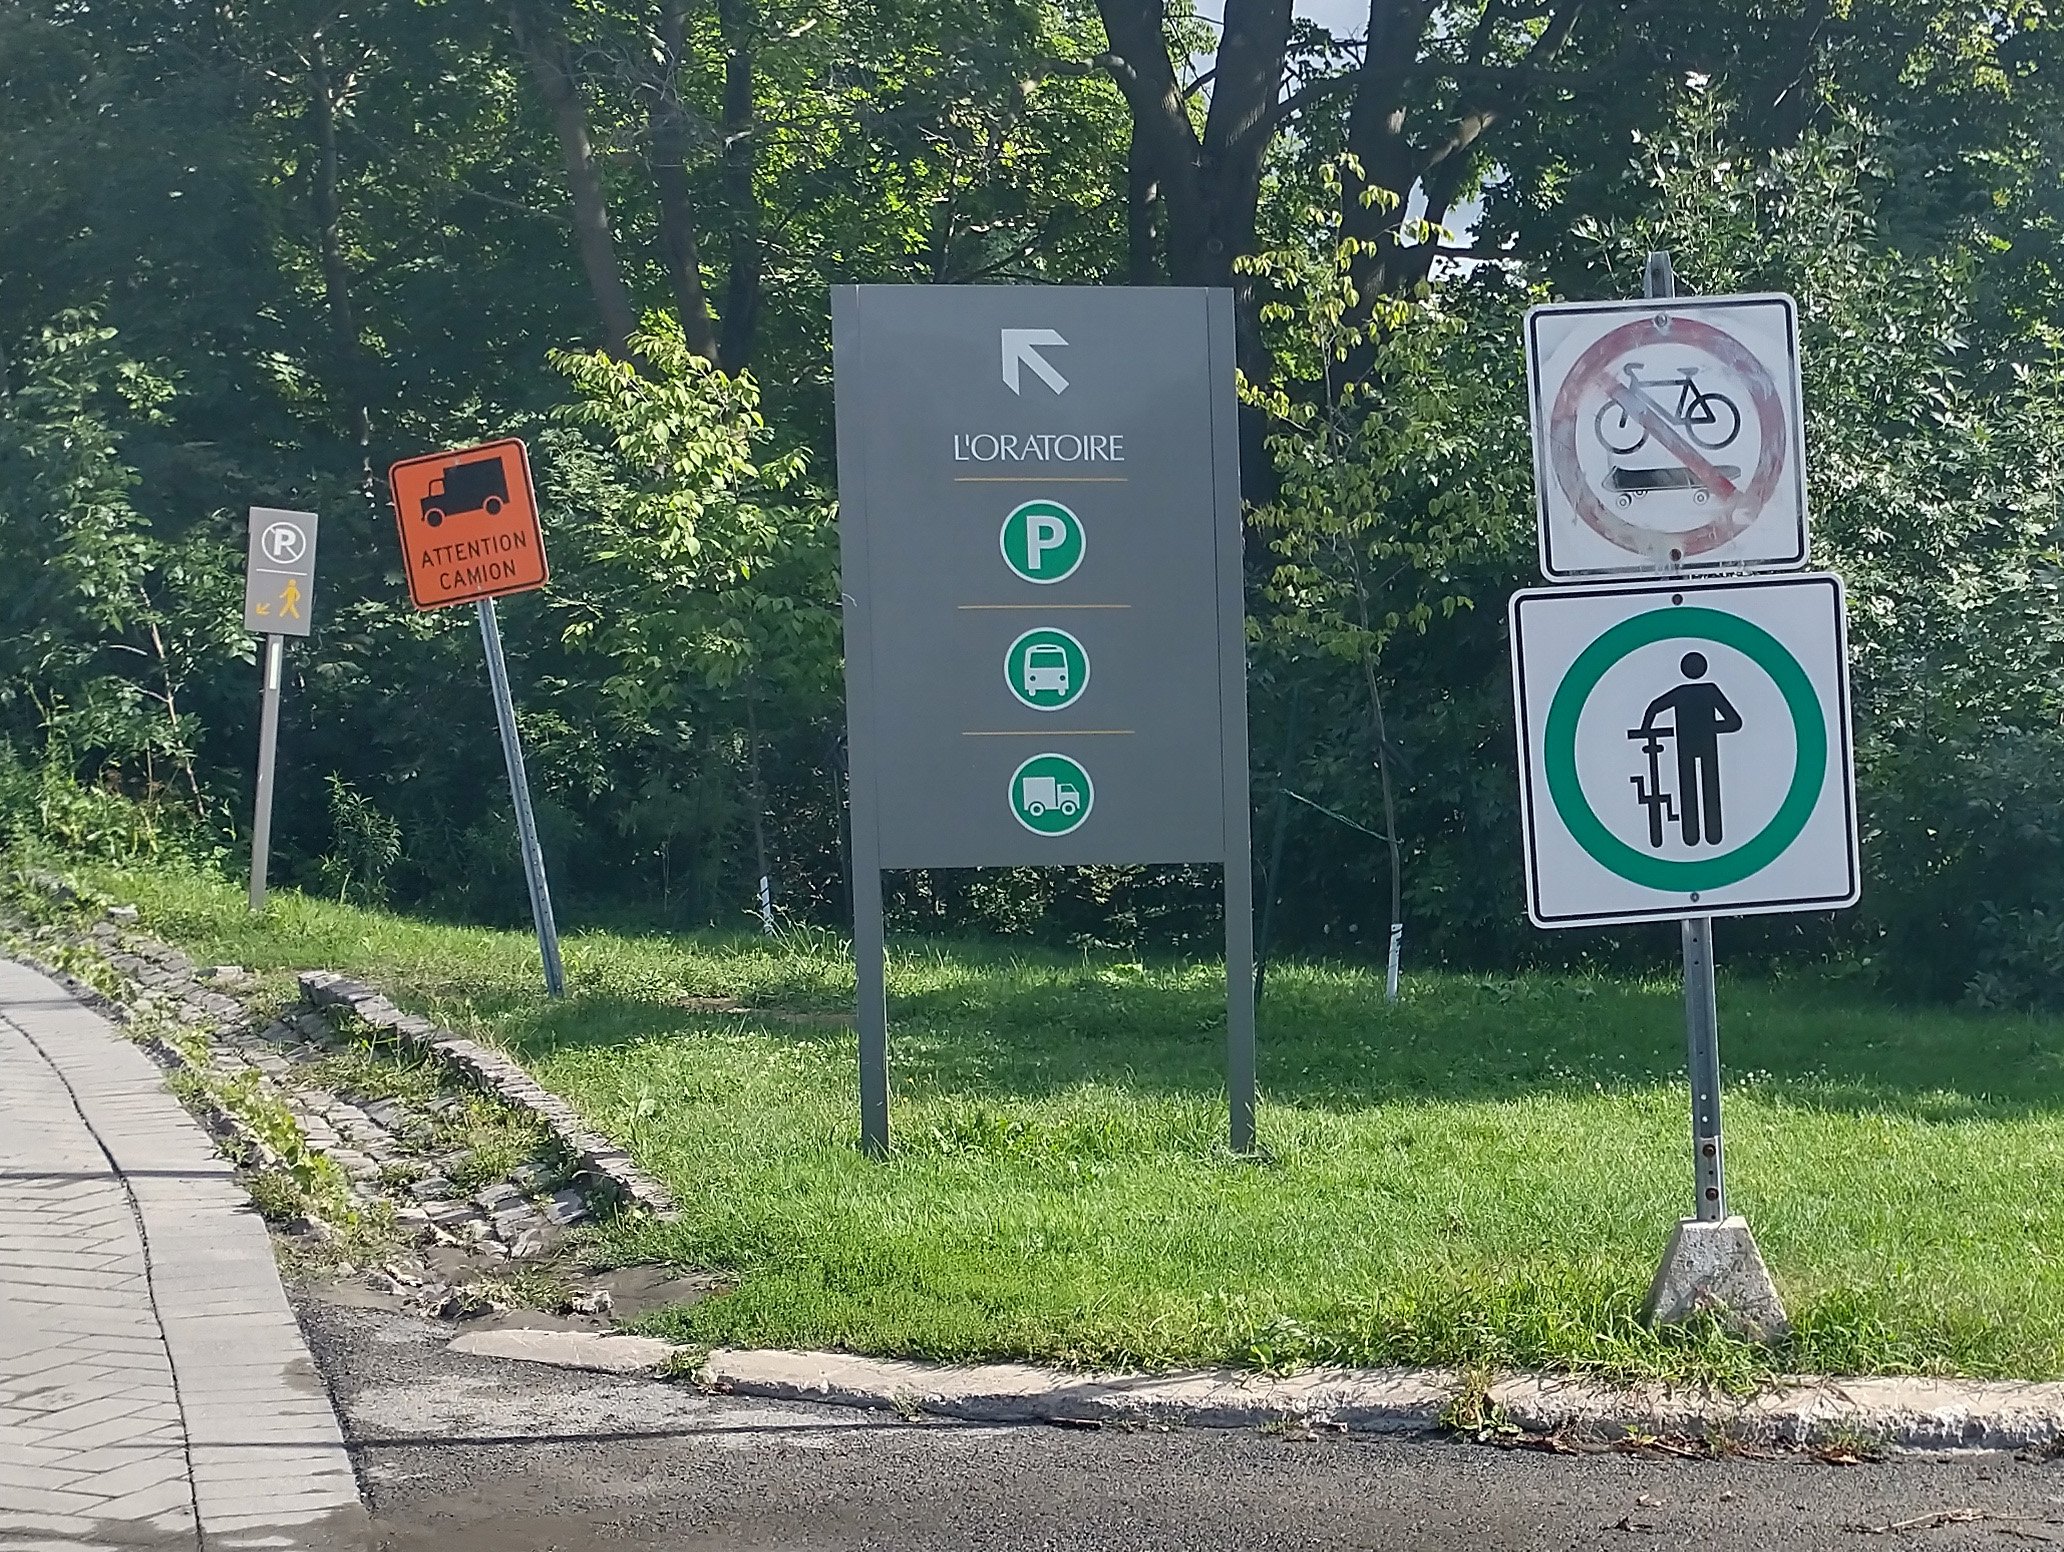 This confusing bike signage courtesy of the one guy who got hit by a bus going downhill while training here...